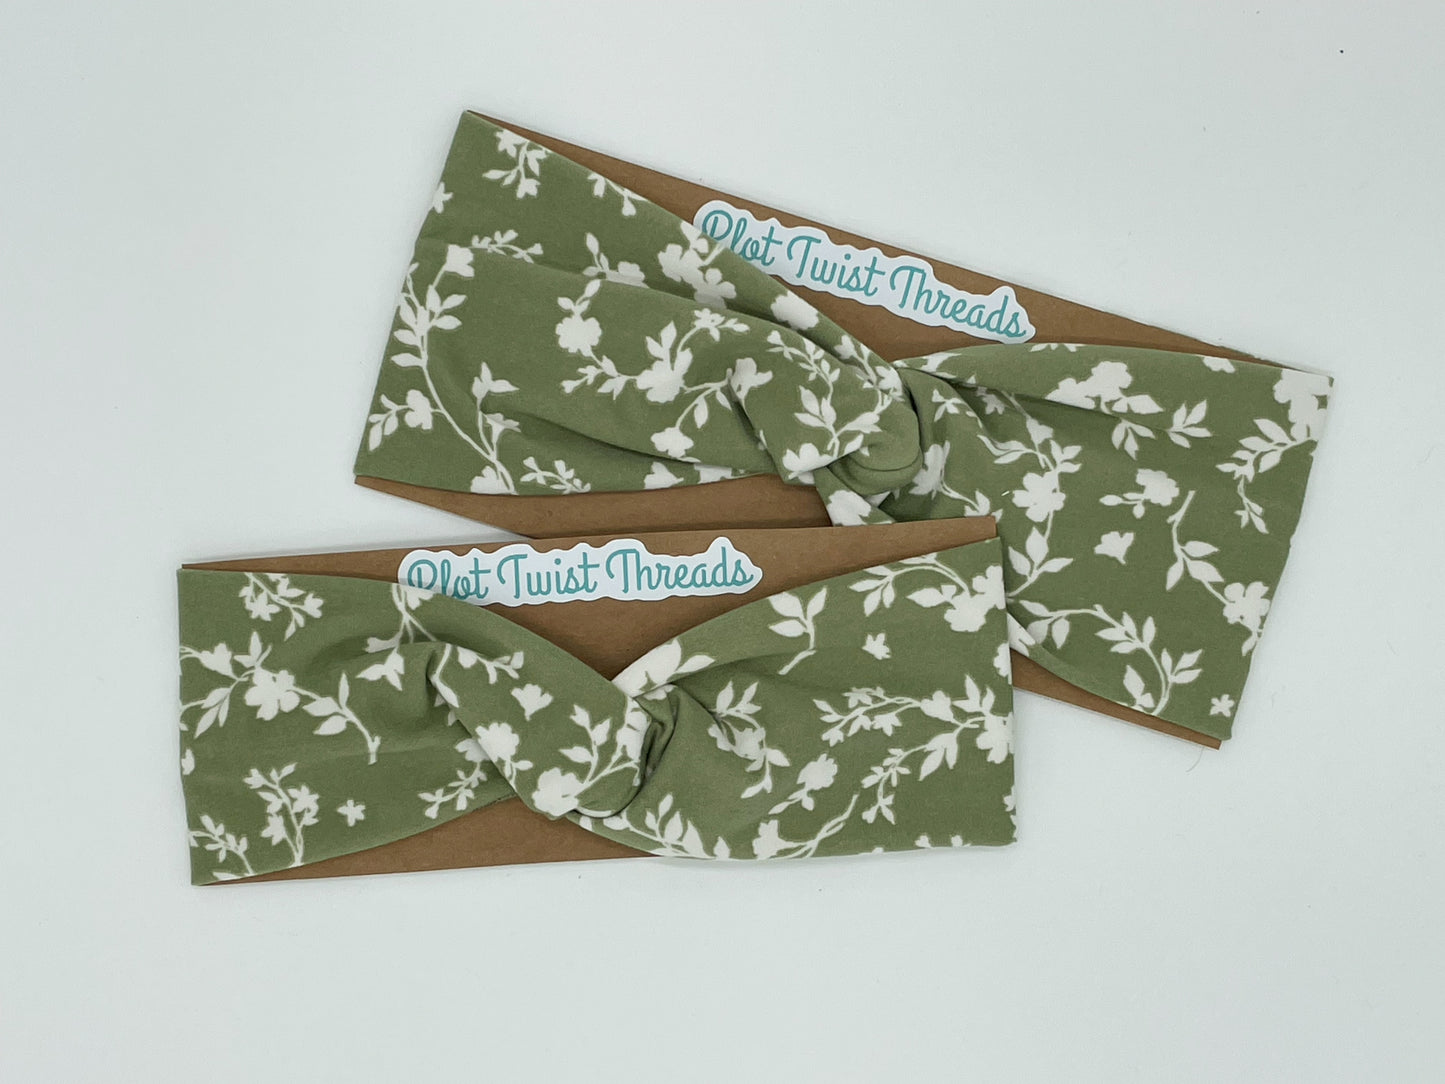 Youth Knot Headband - Green with White Flowers